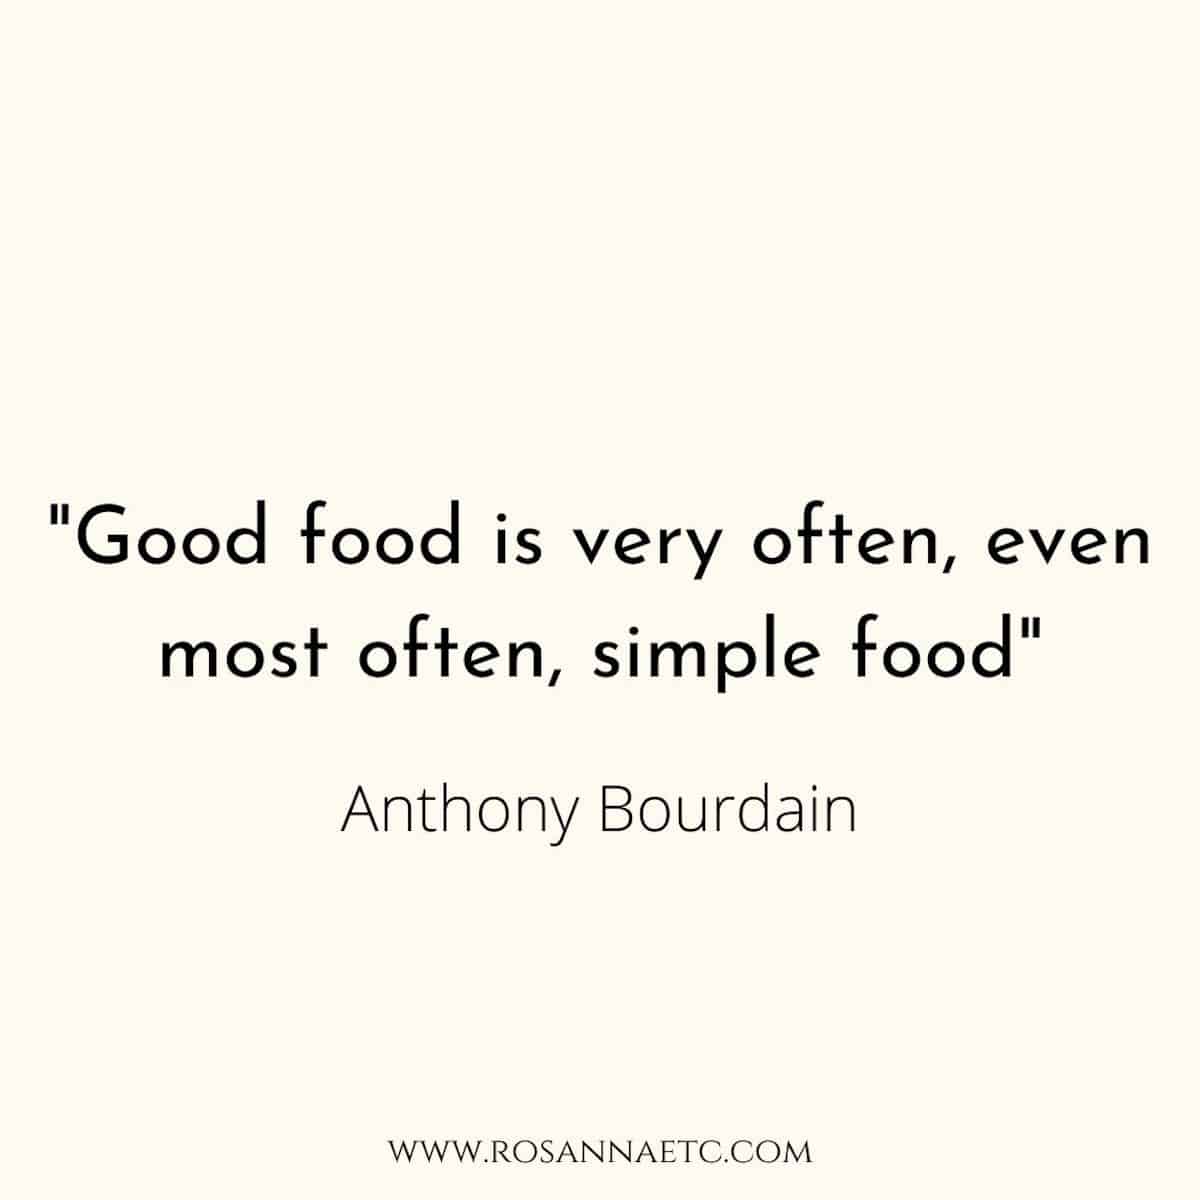 A quote from Anthony Bourdain that reads "Good food is very often, simple food".